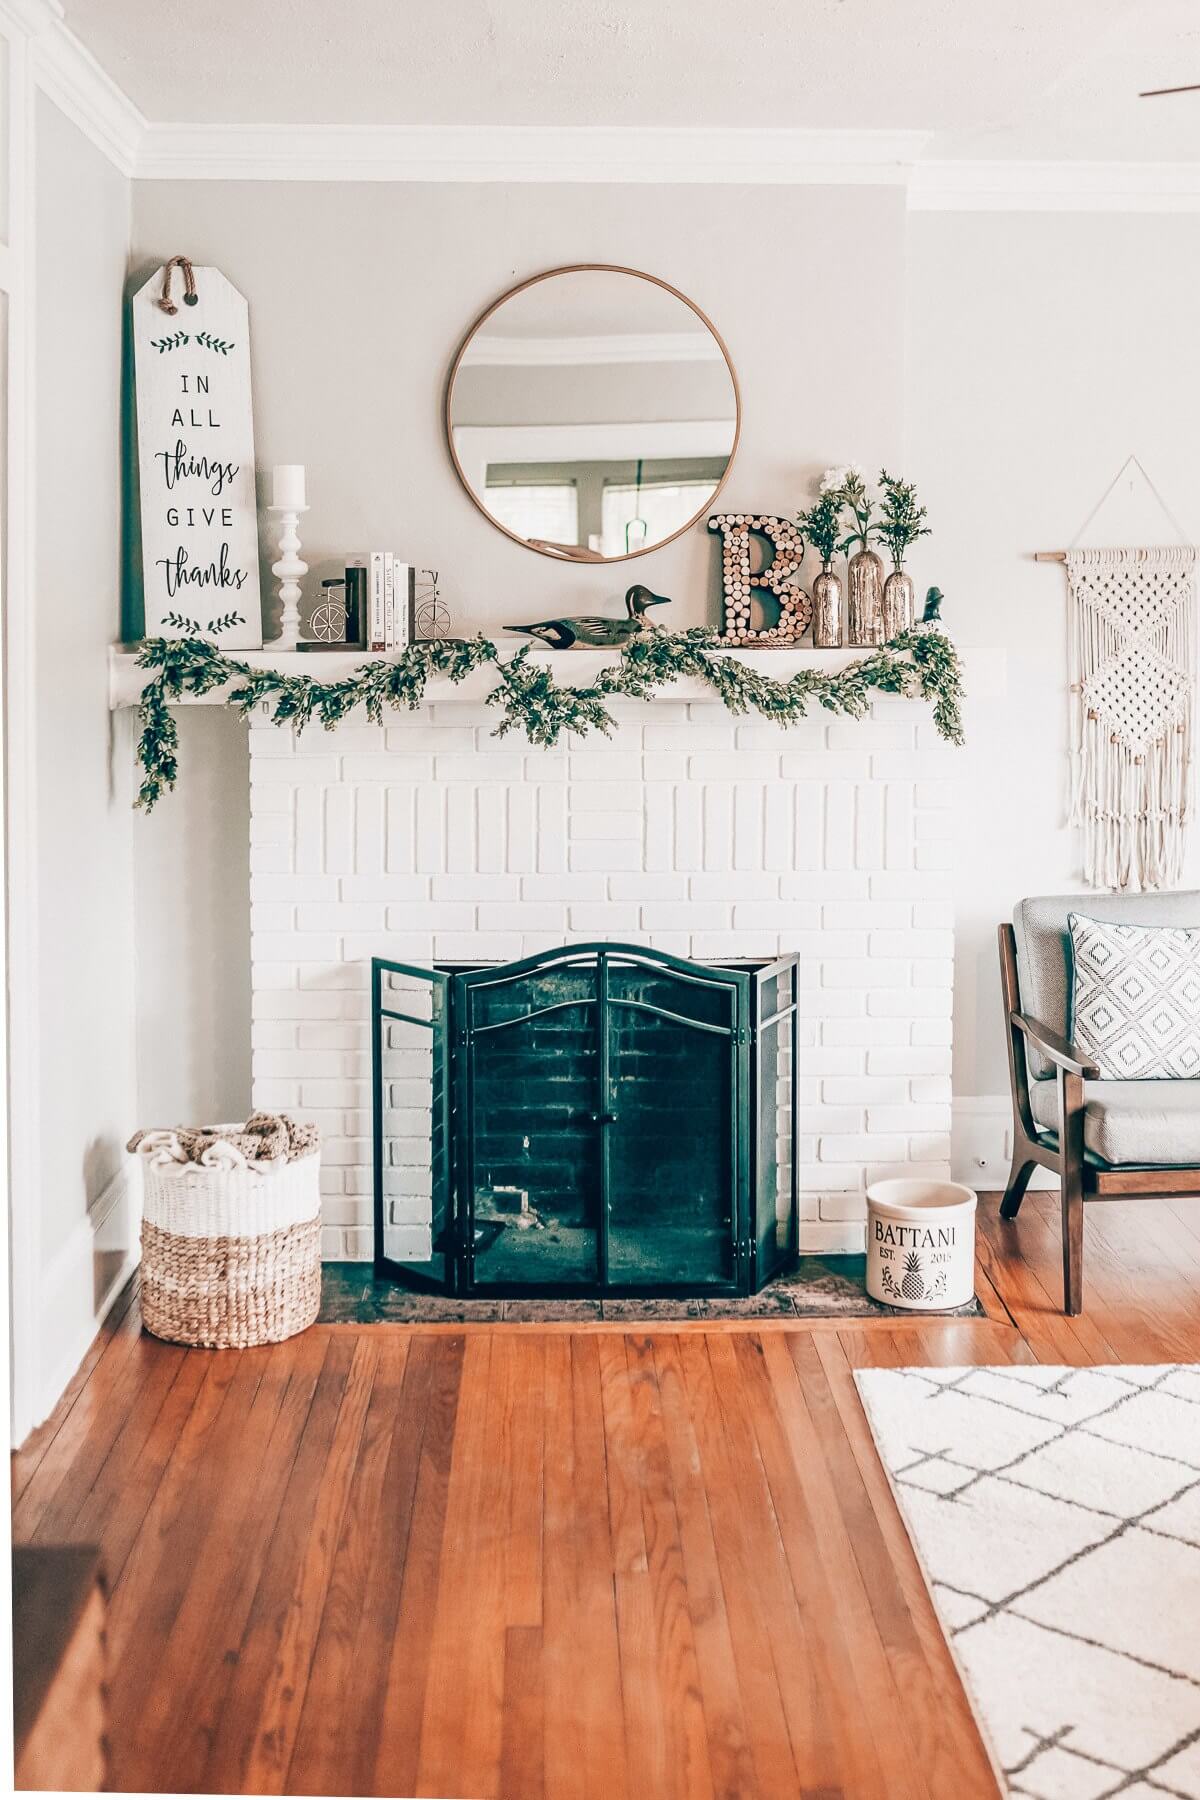 Charming Rustic Fireplace Christmas Decorations